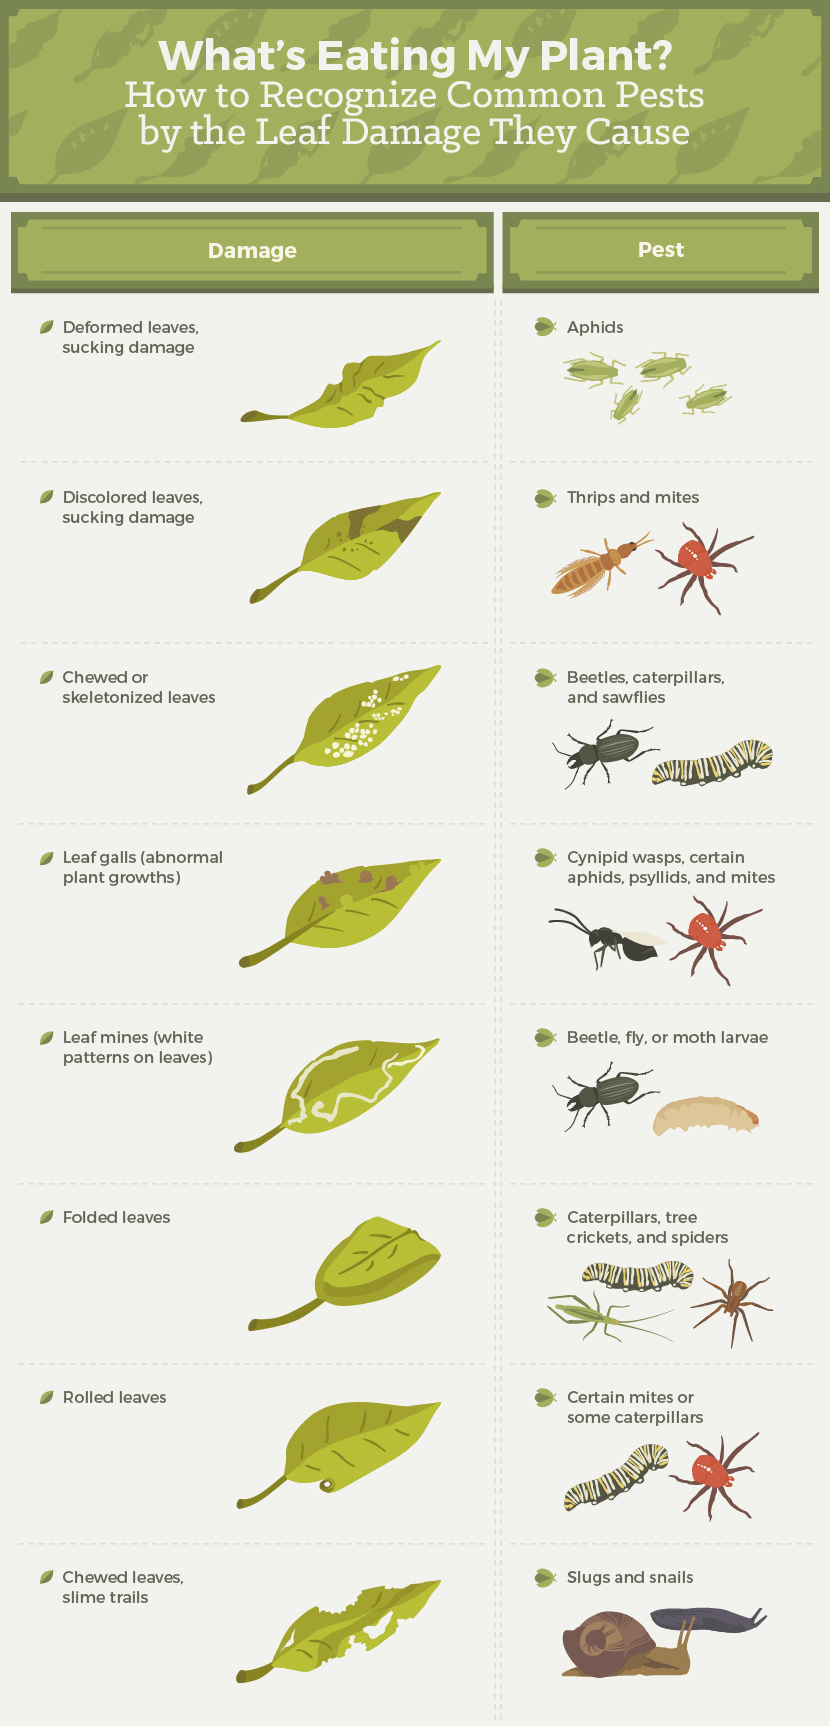 How to Recognize Garden Pests by Leaf Damage